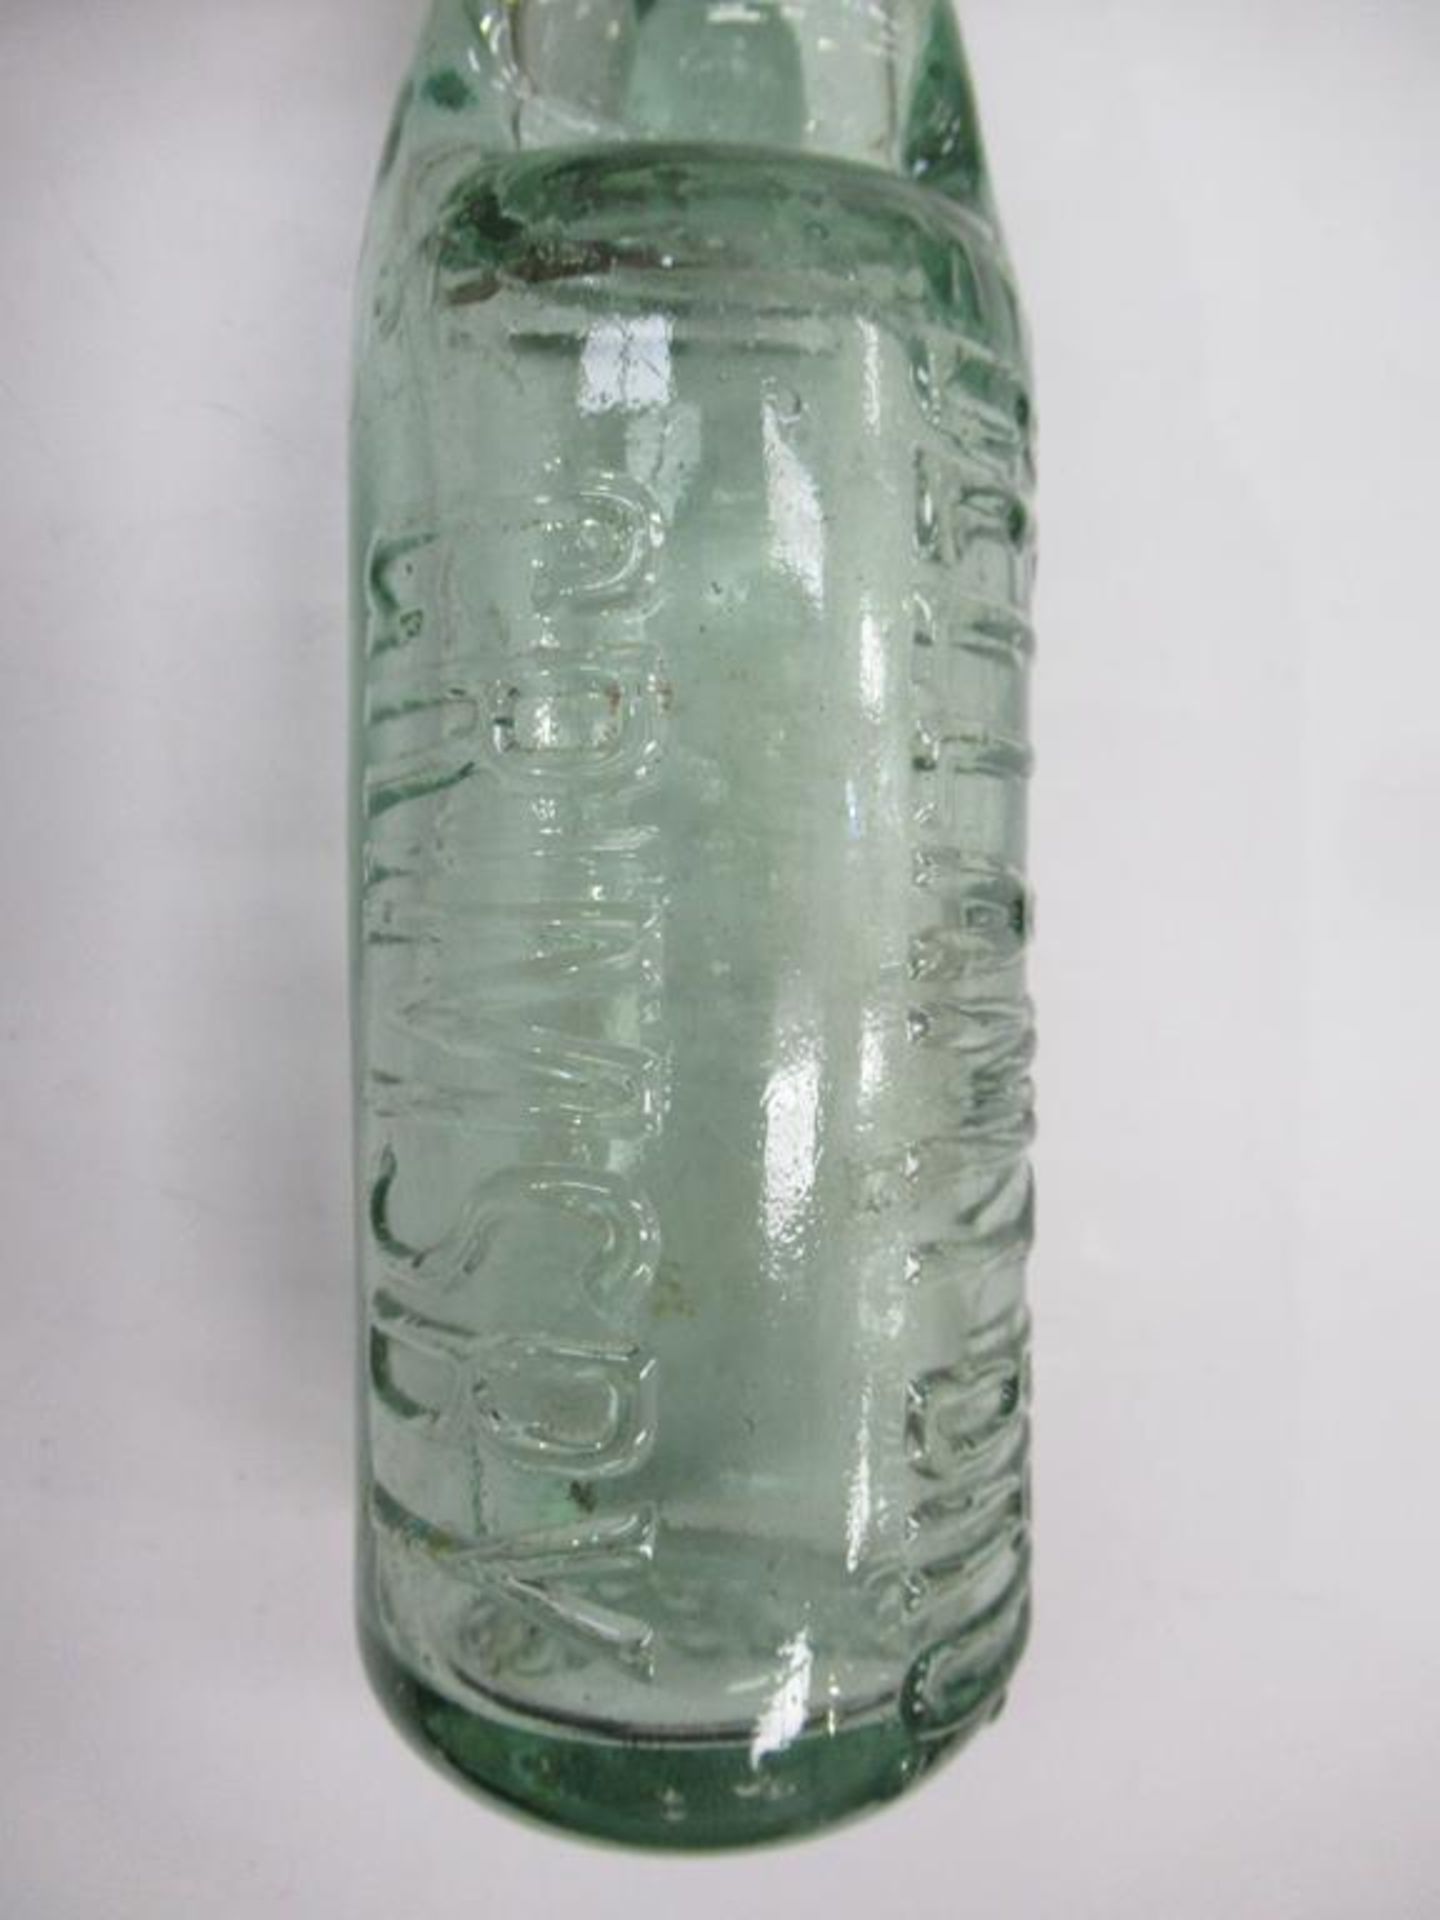 7x Grimsby (3x Grimsby & Louth) Bellamy Bro's Codd bottles - Image 7 of 23